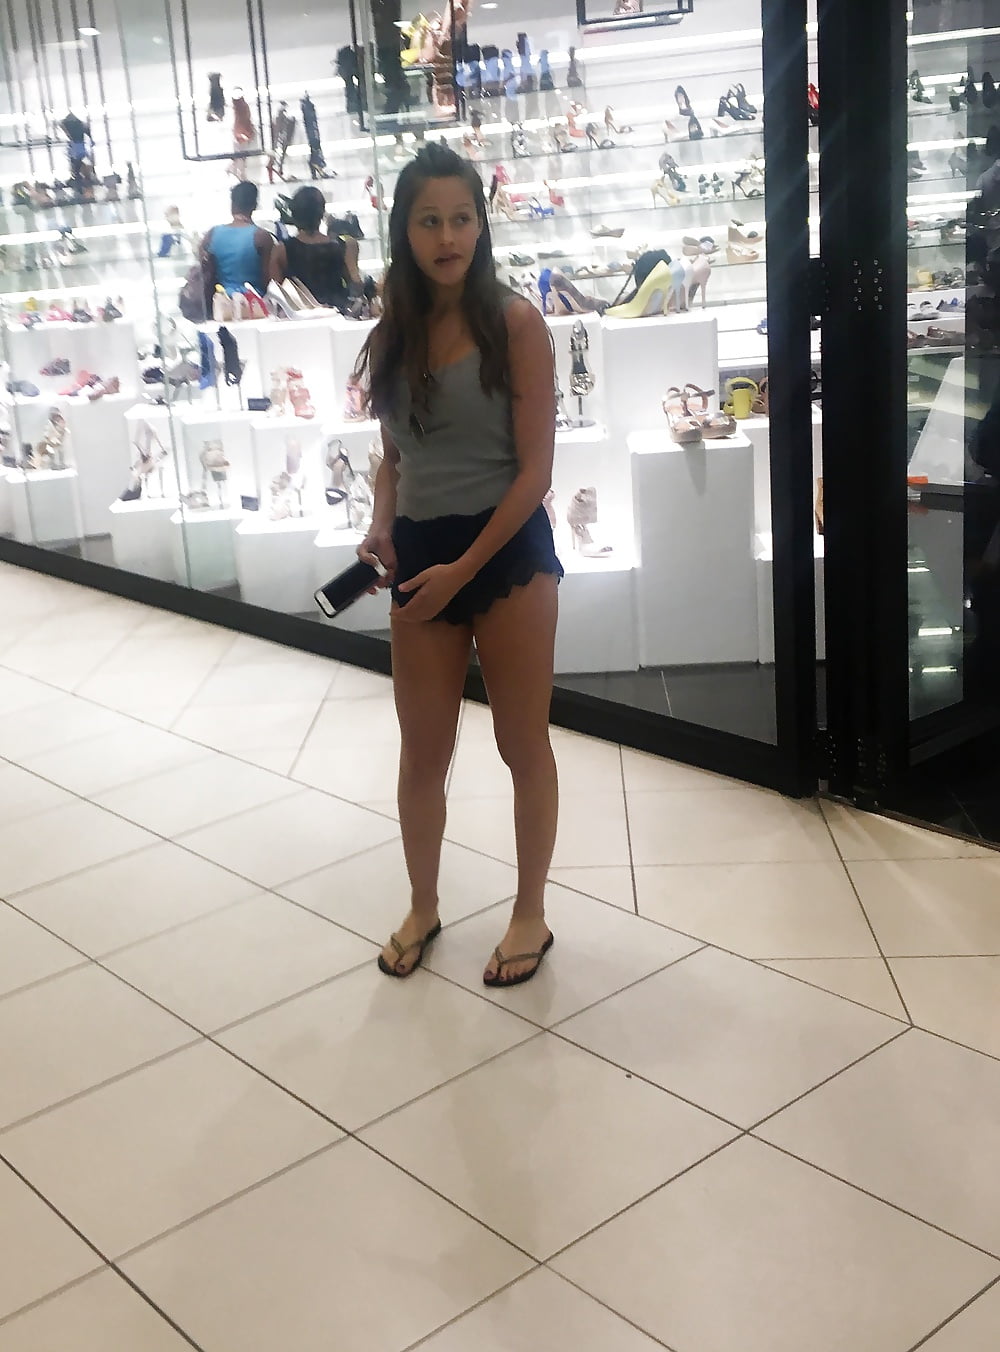 Hot teen mall slut in tiny shorts and not her mom adult photos